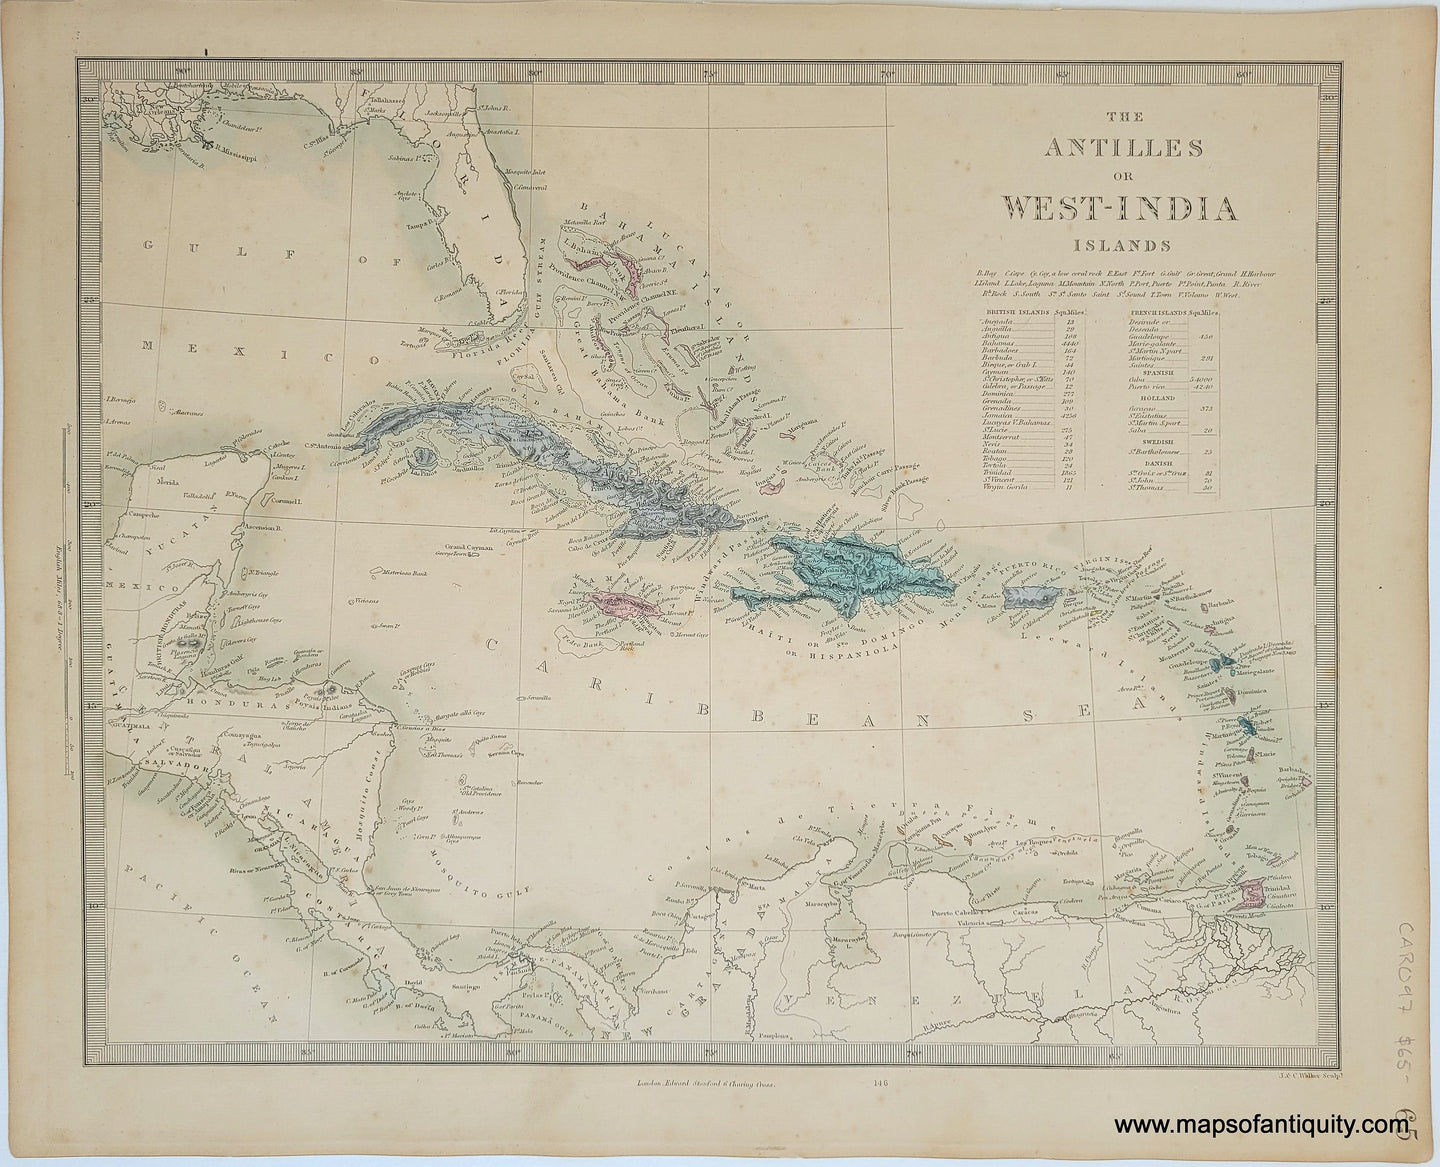 Genuine-Antique-Map-The-Antilles-or-West-India-Islands-Caribbean--1860-SDUK-Society-for-the-Diffusion-of-Useful-Knowledge-Maps-Of-Antiquity-1800s-19th-century